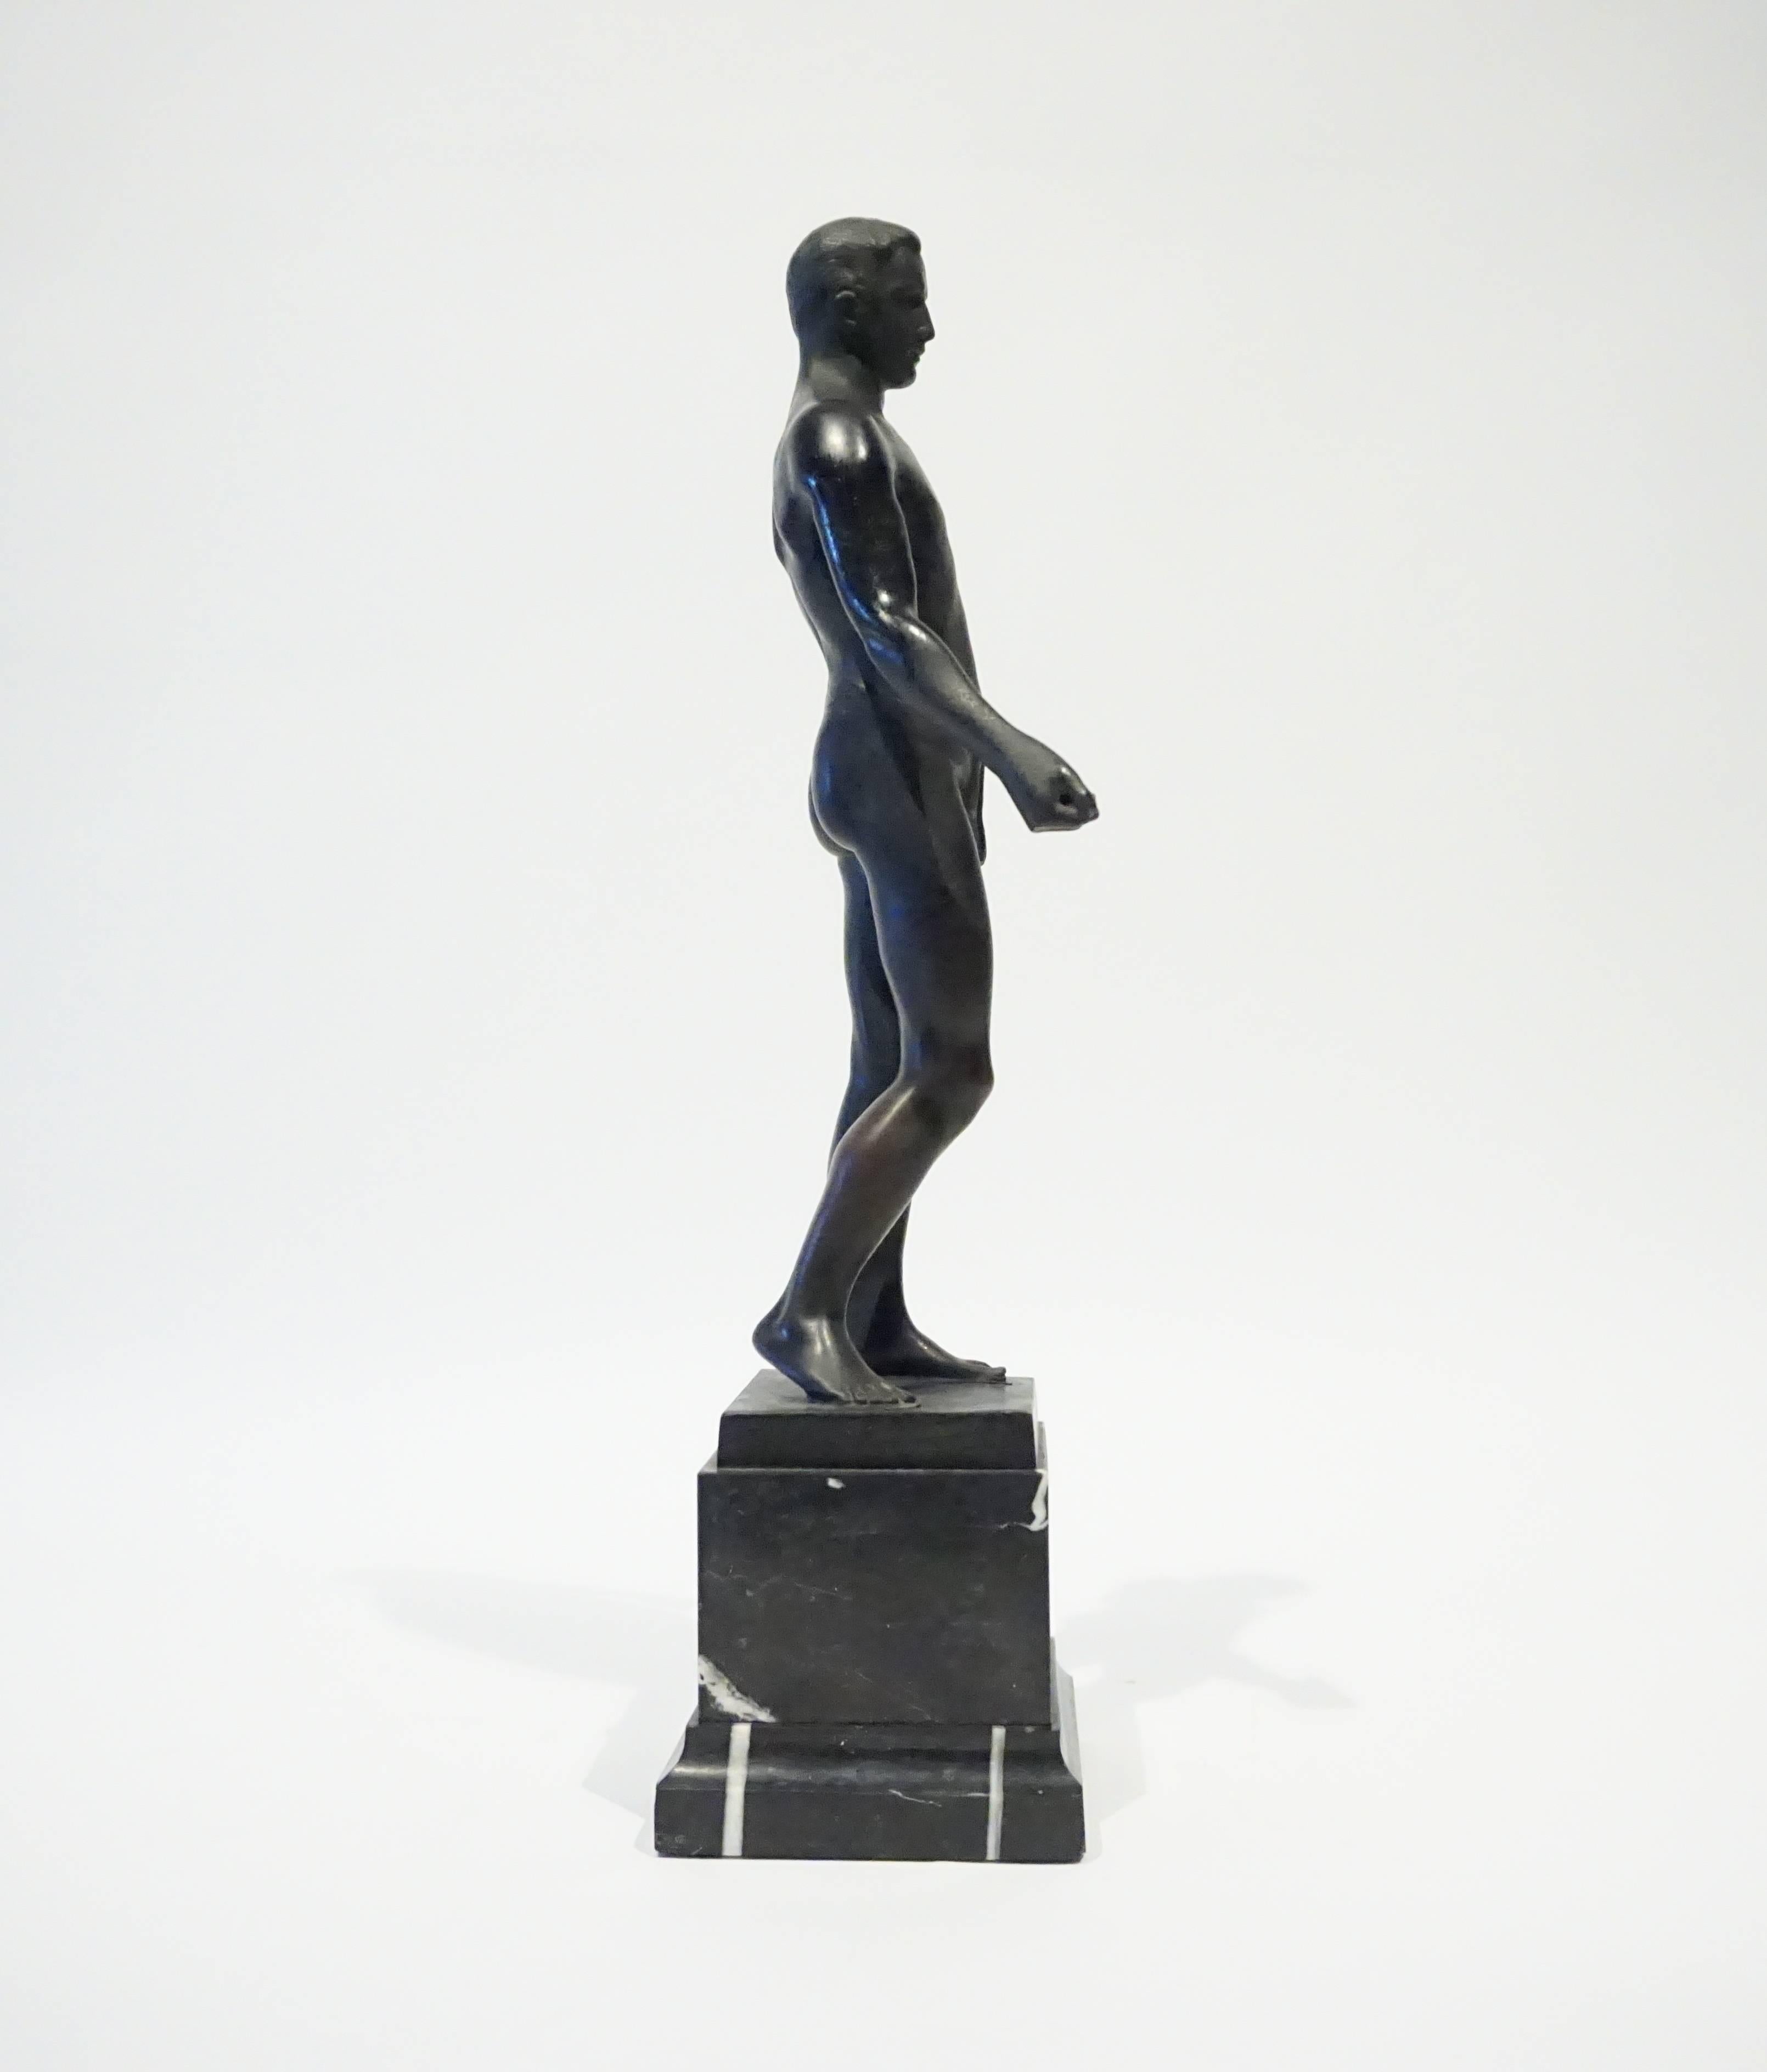 A patinated bronze figure of a male athlete standing on a classical black marble base by German sculptor Ferdinand Frick. C. 1910. Signed on the bronze base Ferd. Frick fec.  Also signed by the foundry: Oskar Gladenbeck and 